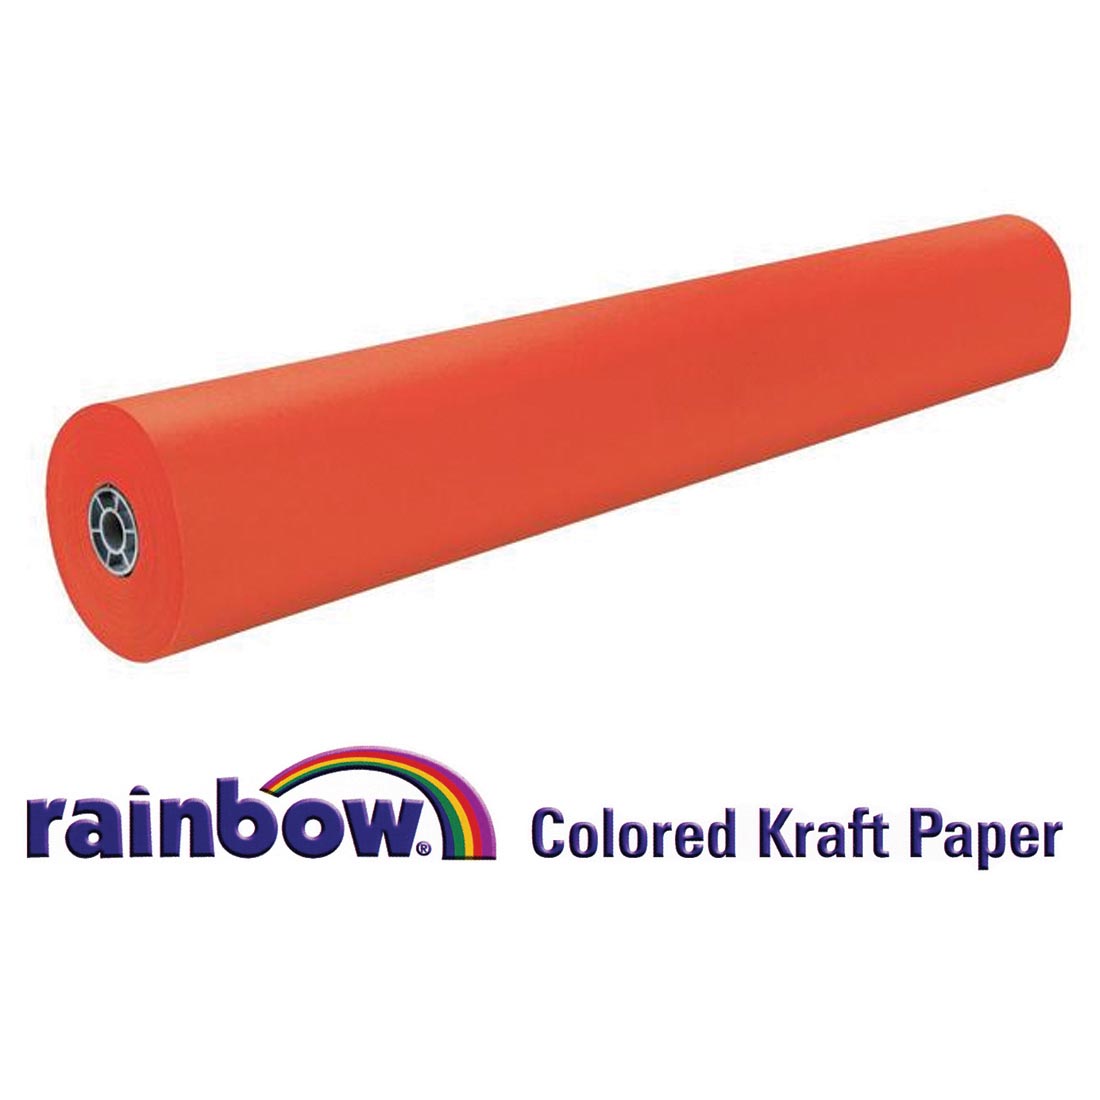 Roll of Orange Paper with text Rainbow Colored Kraft Paper